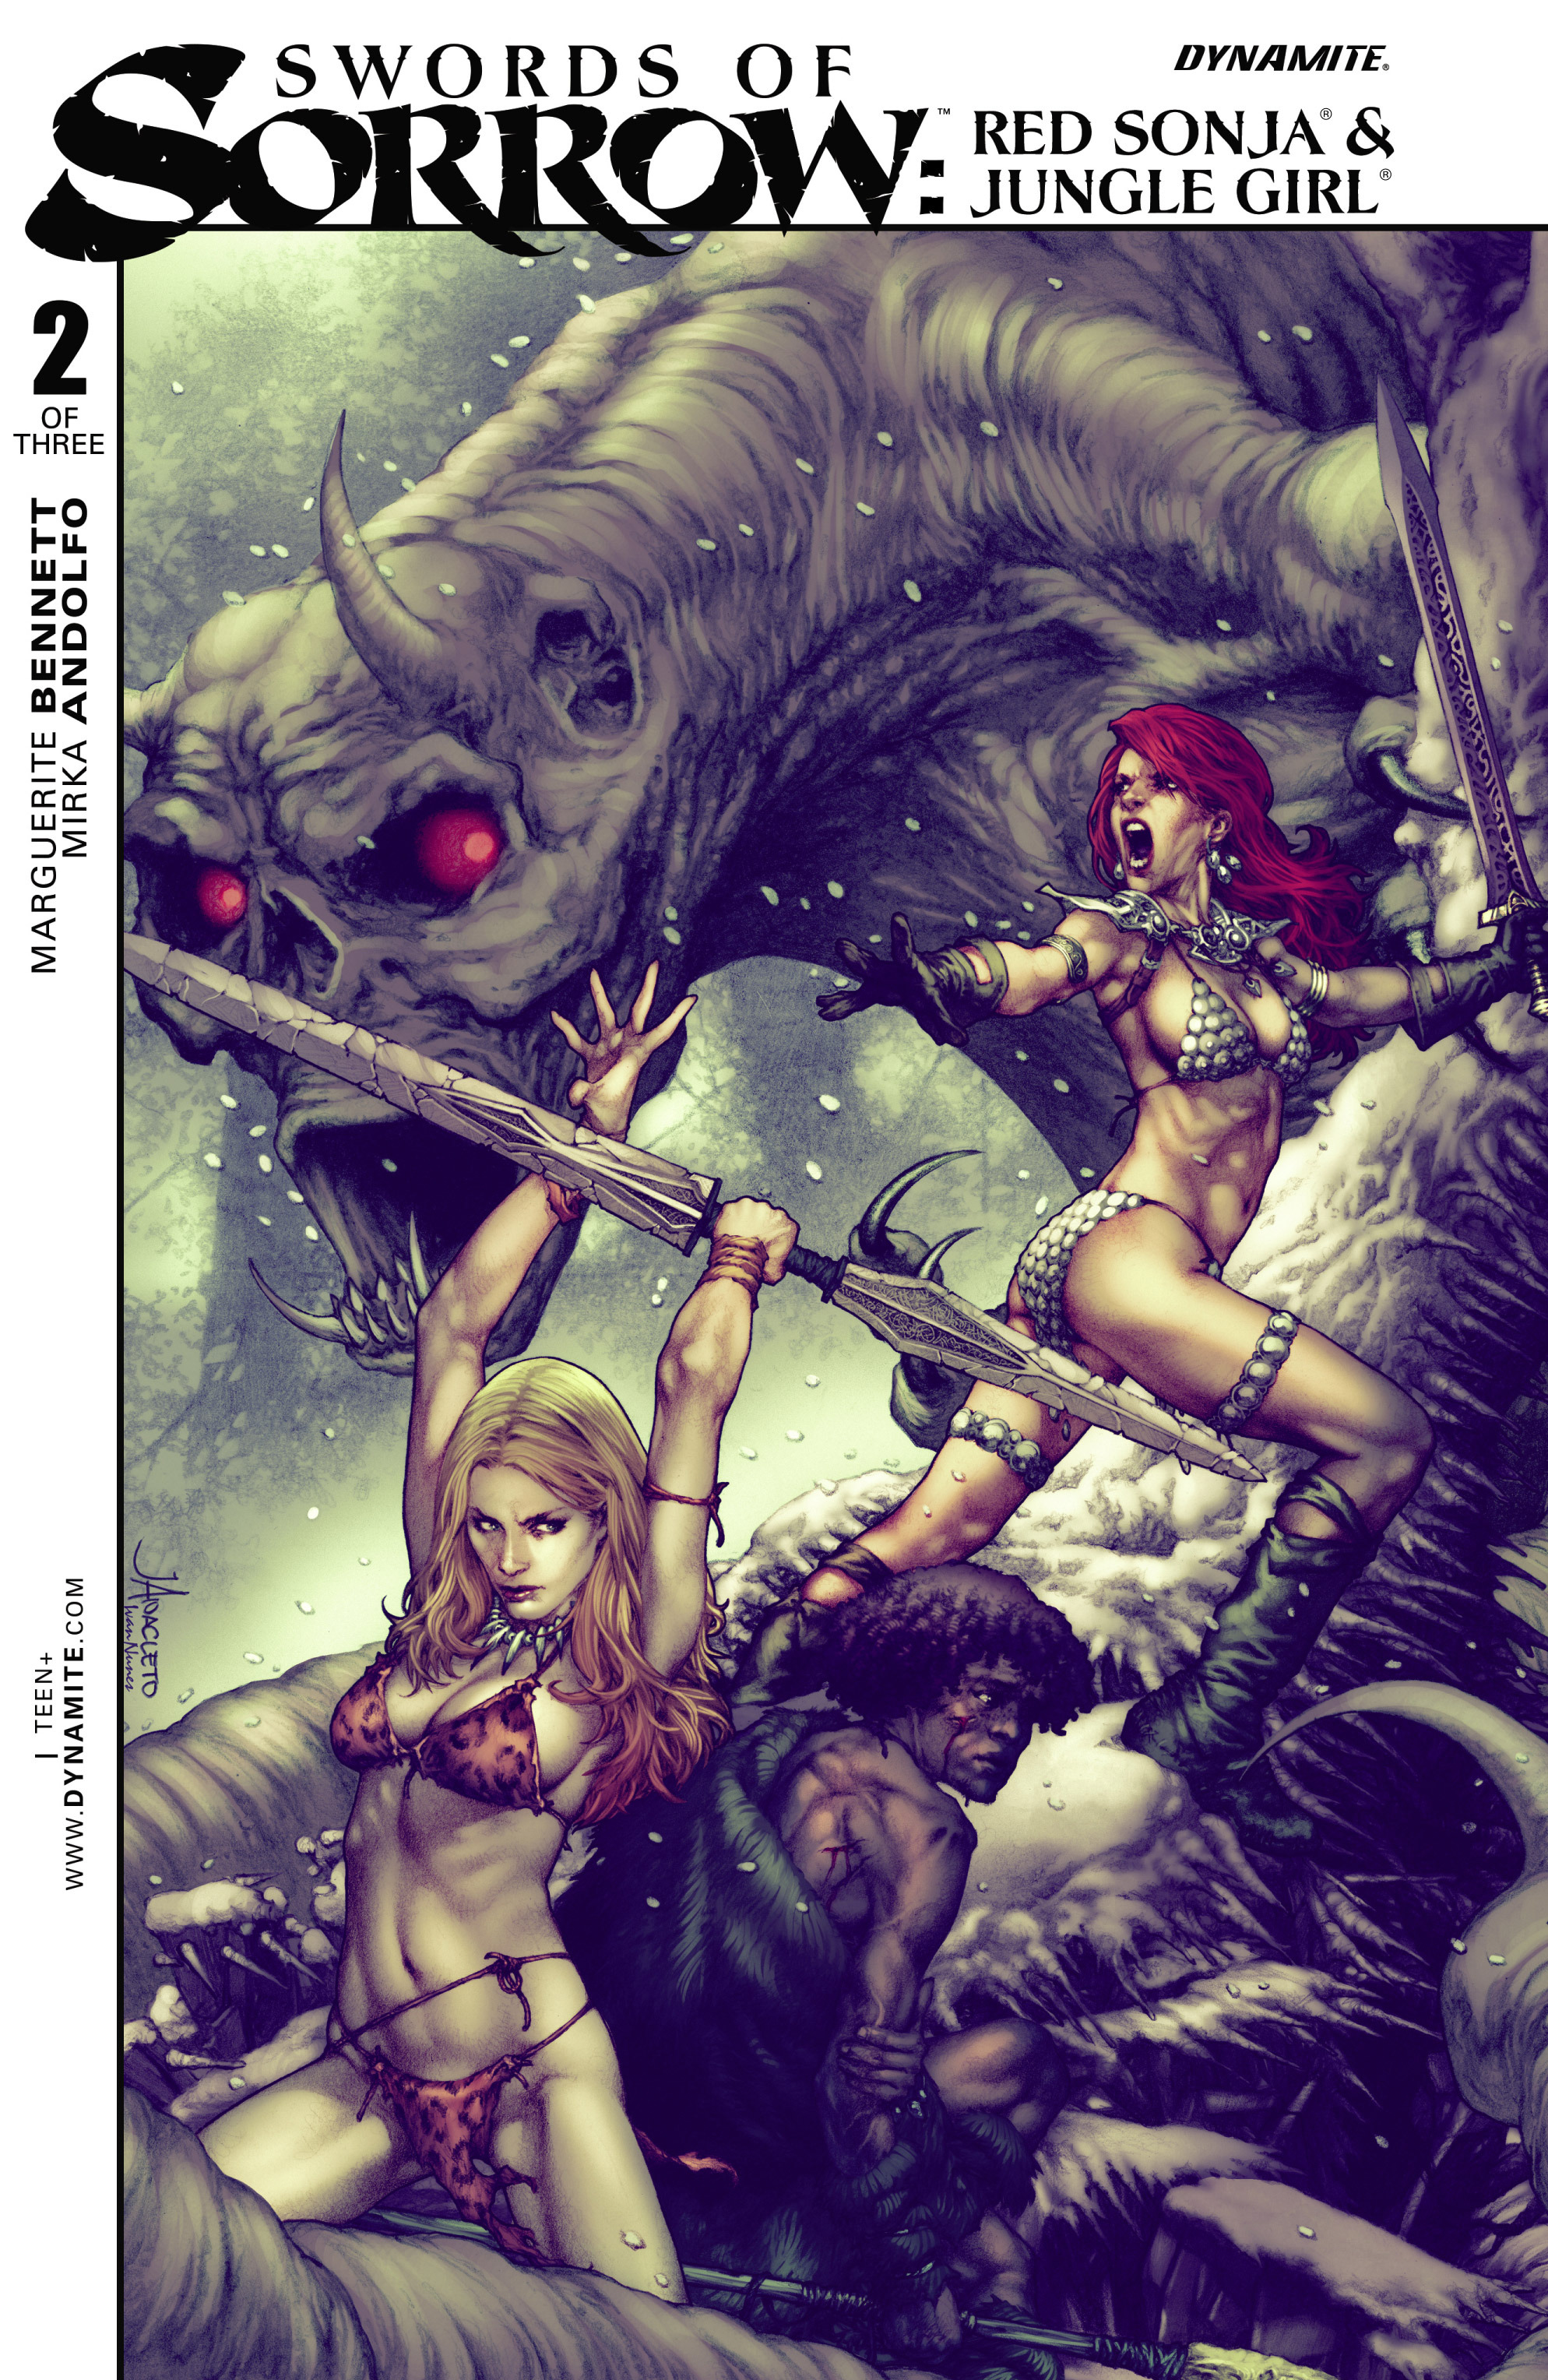 Read online Swords of Sorrow: Red Sonja & Jungle Girl comic -  Issue #2 - 1